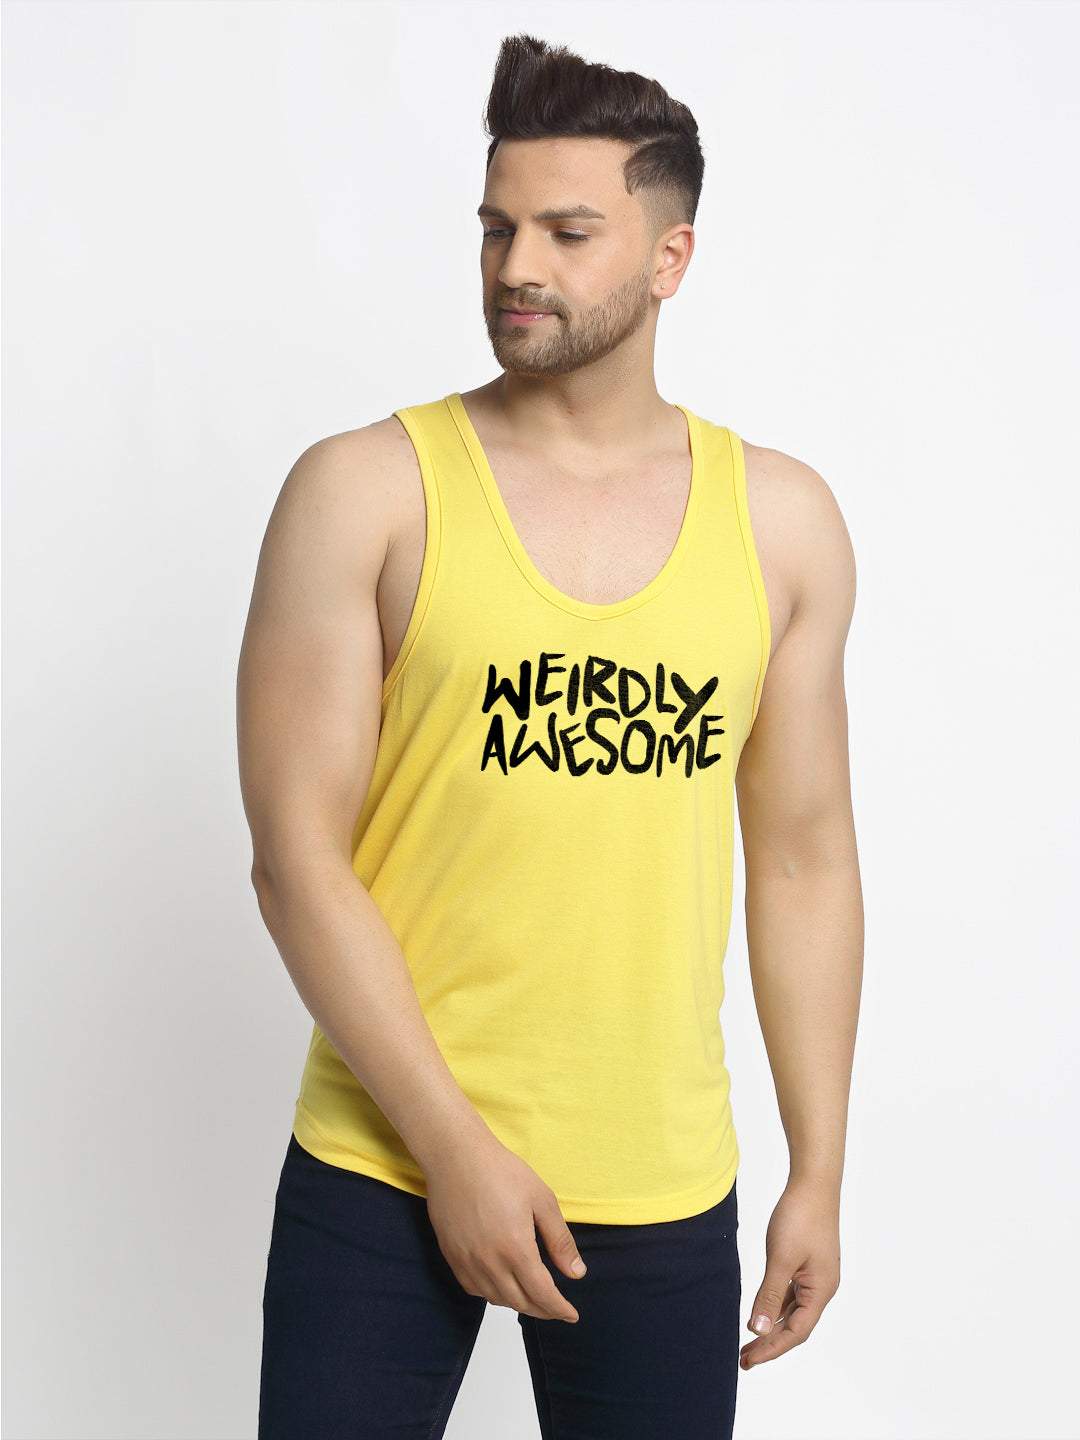 Men's Pack of 2 Turquiose & Yellow Printed Gym vest - Friskers